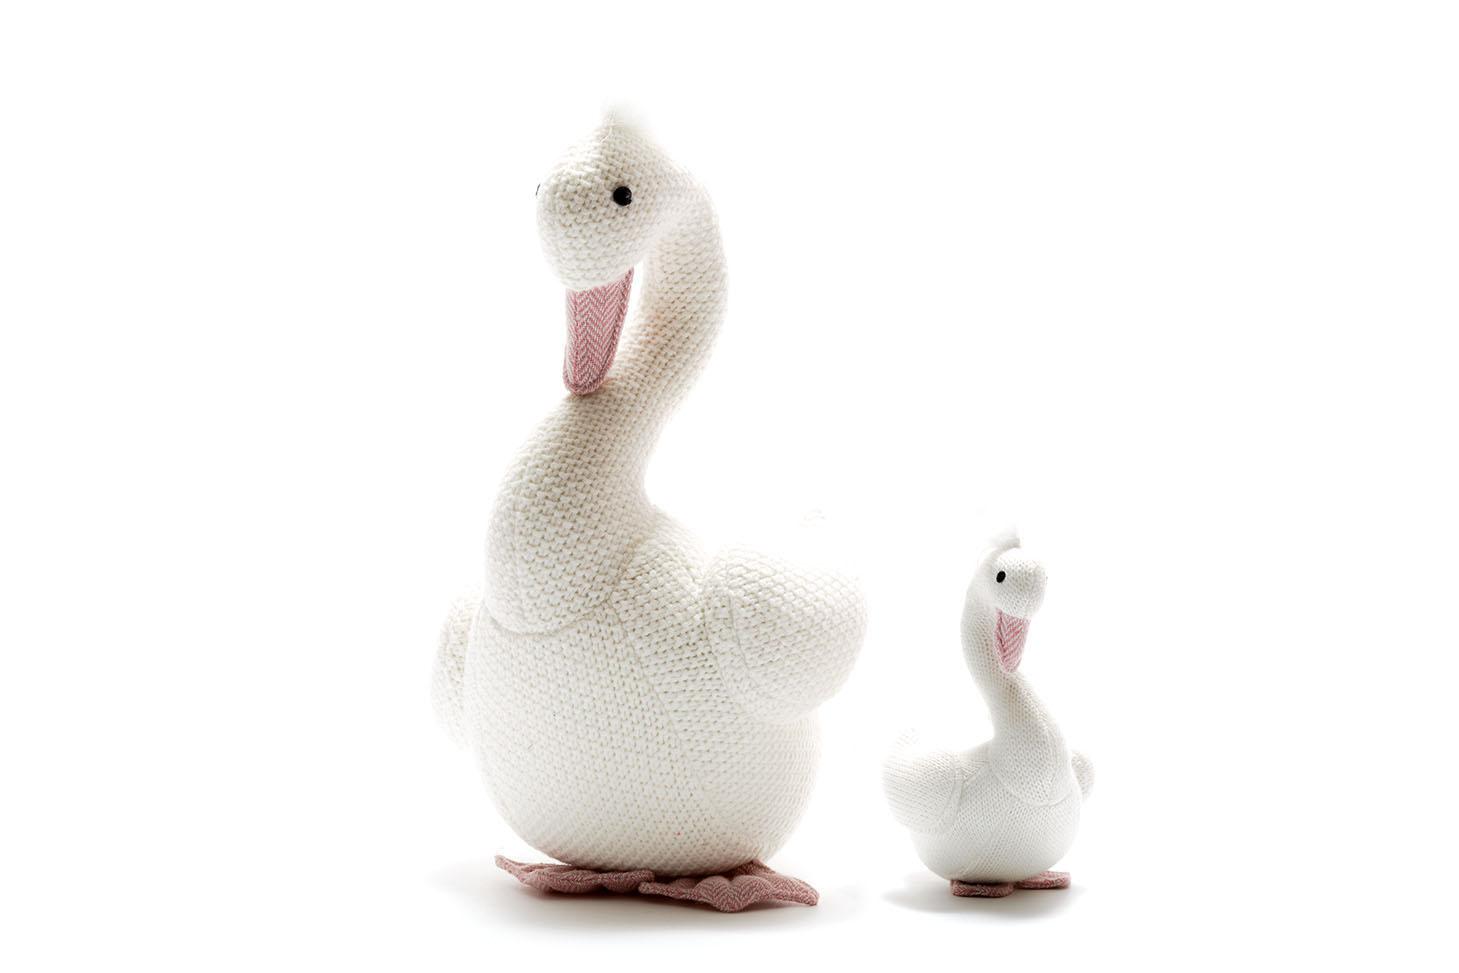 Swan toy and rattle